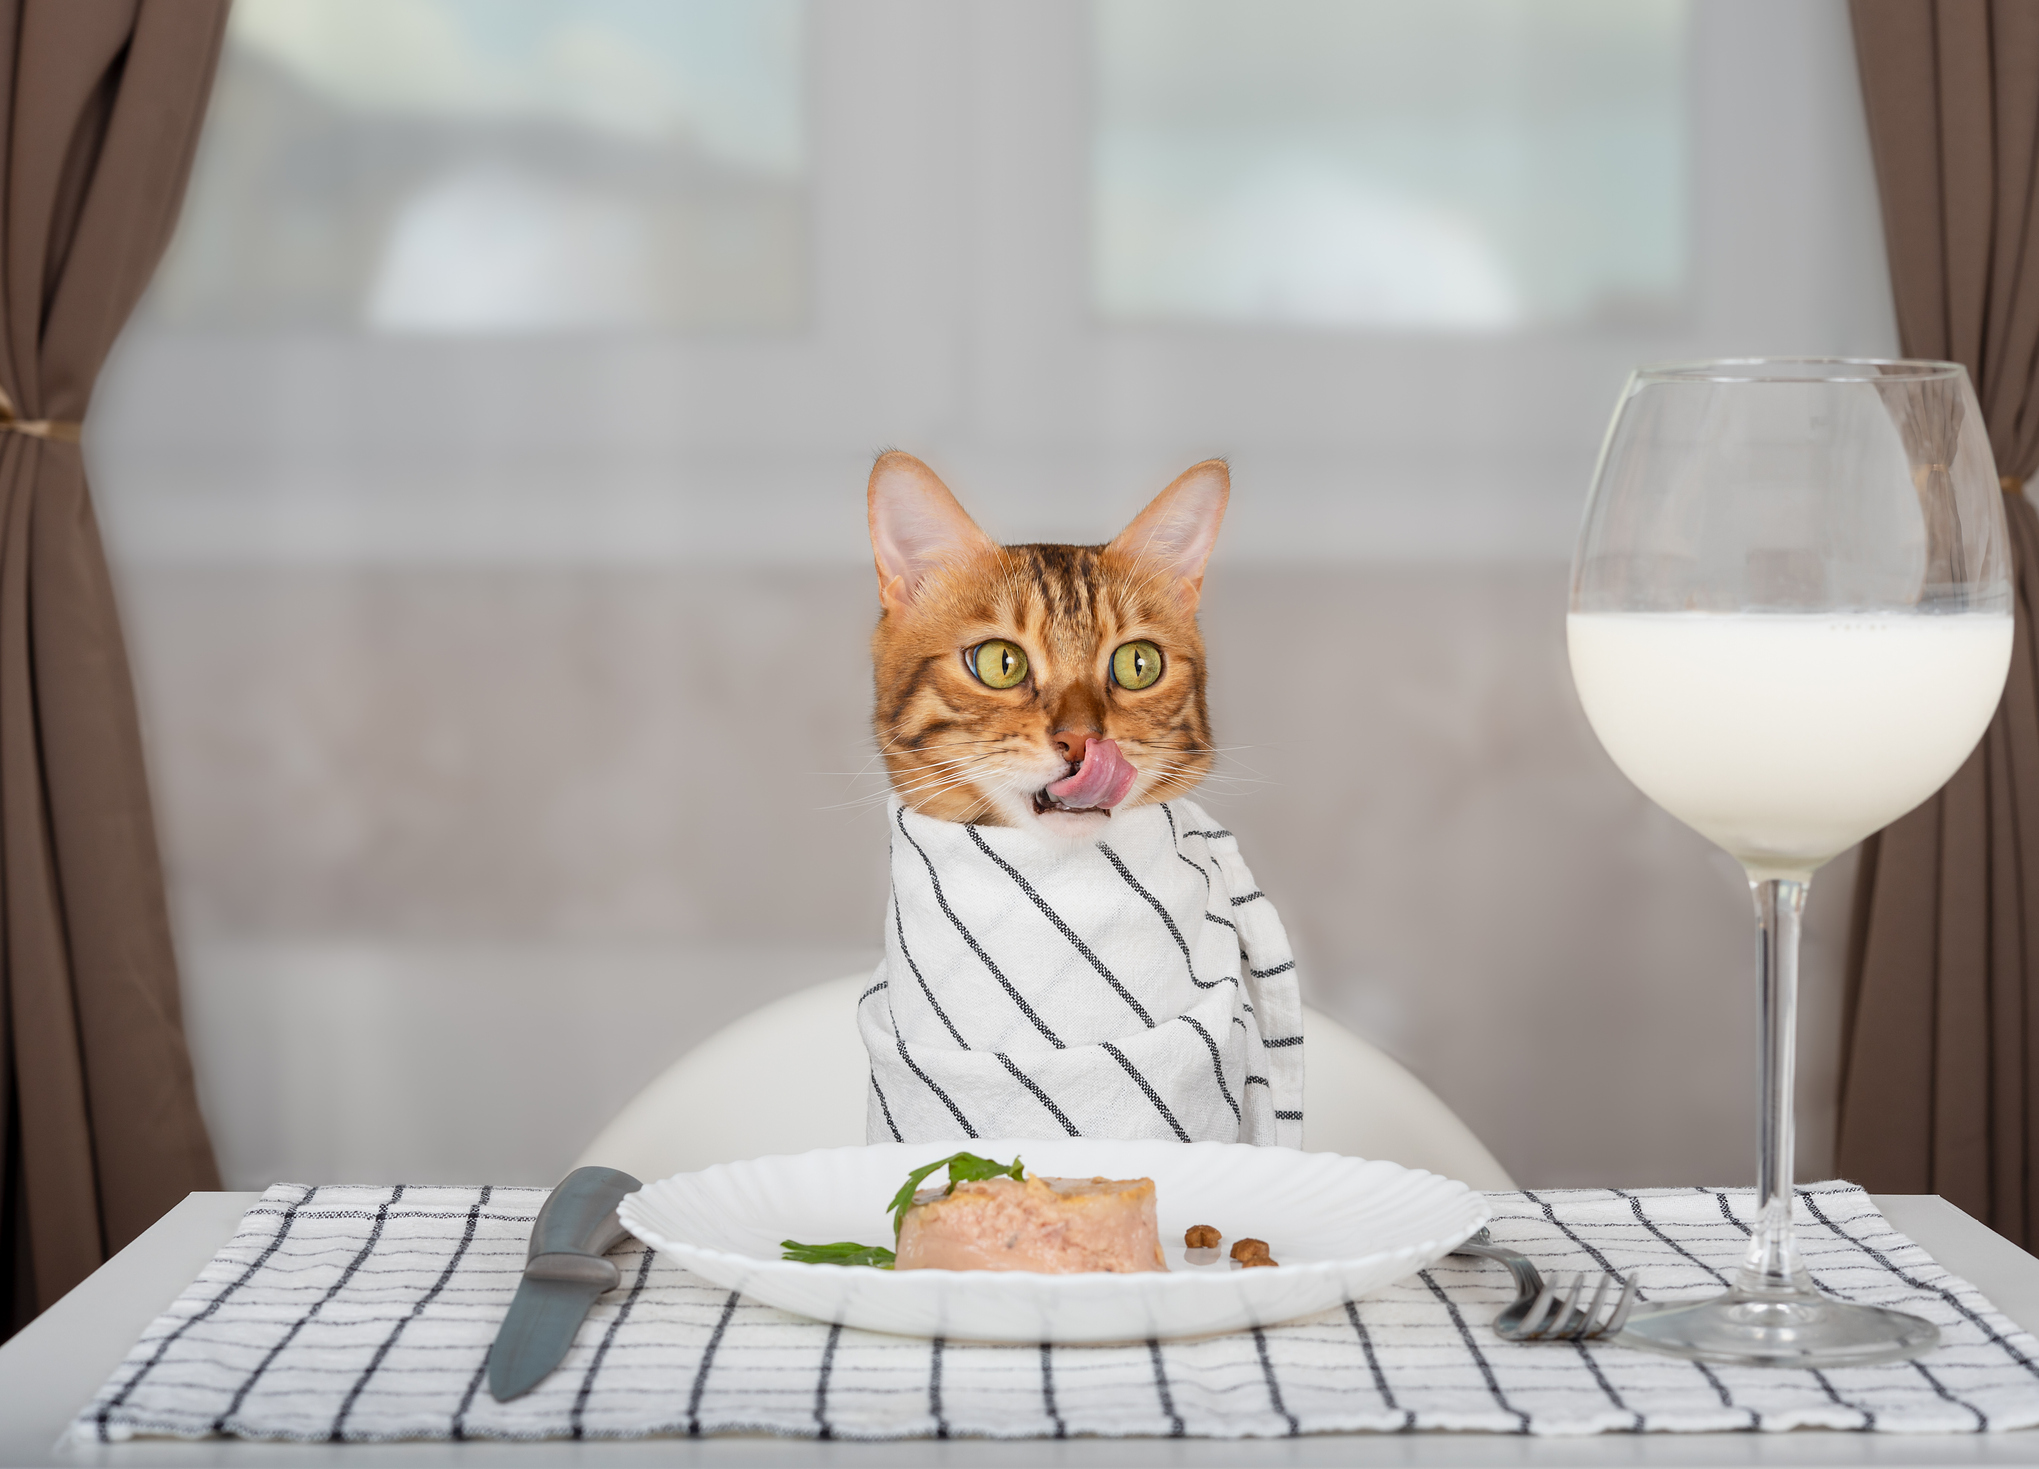 A cat sits in a chair at table dressed in a tablecloth with Fancy Feast on the plate and a wine glass full of milk.